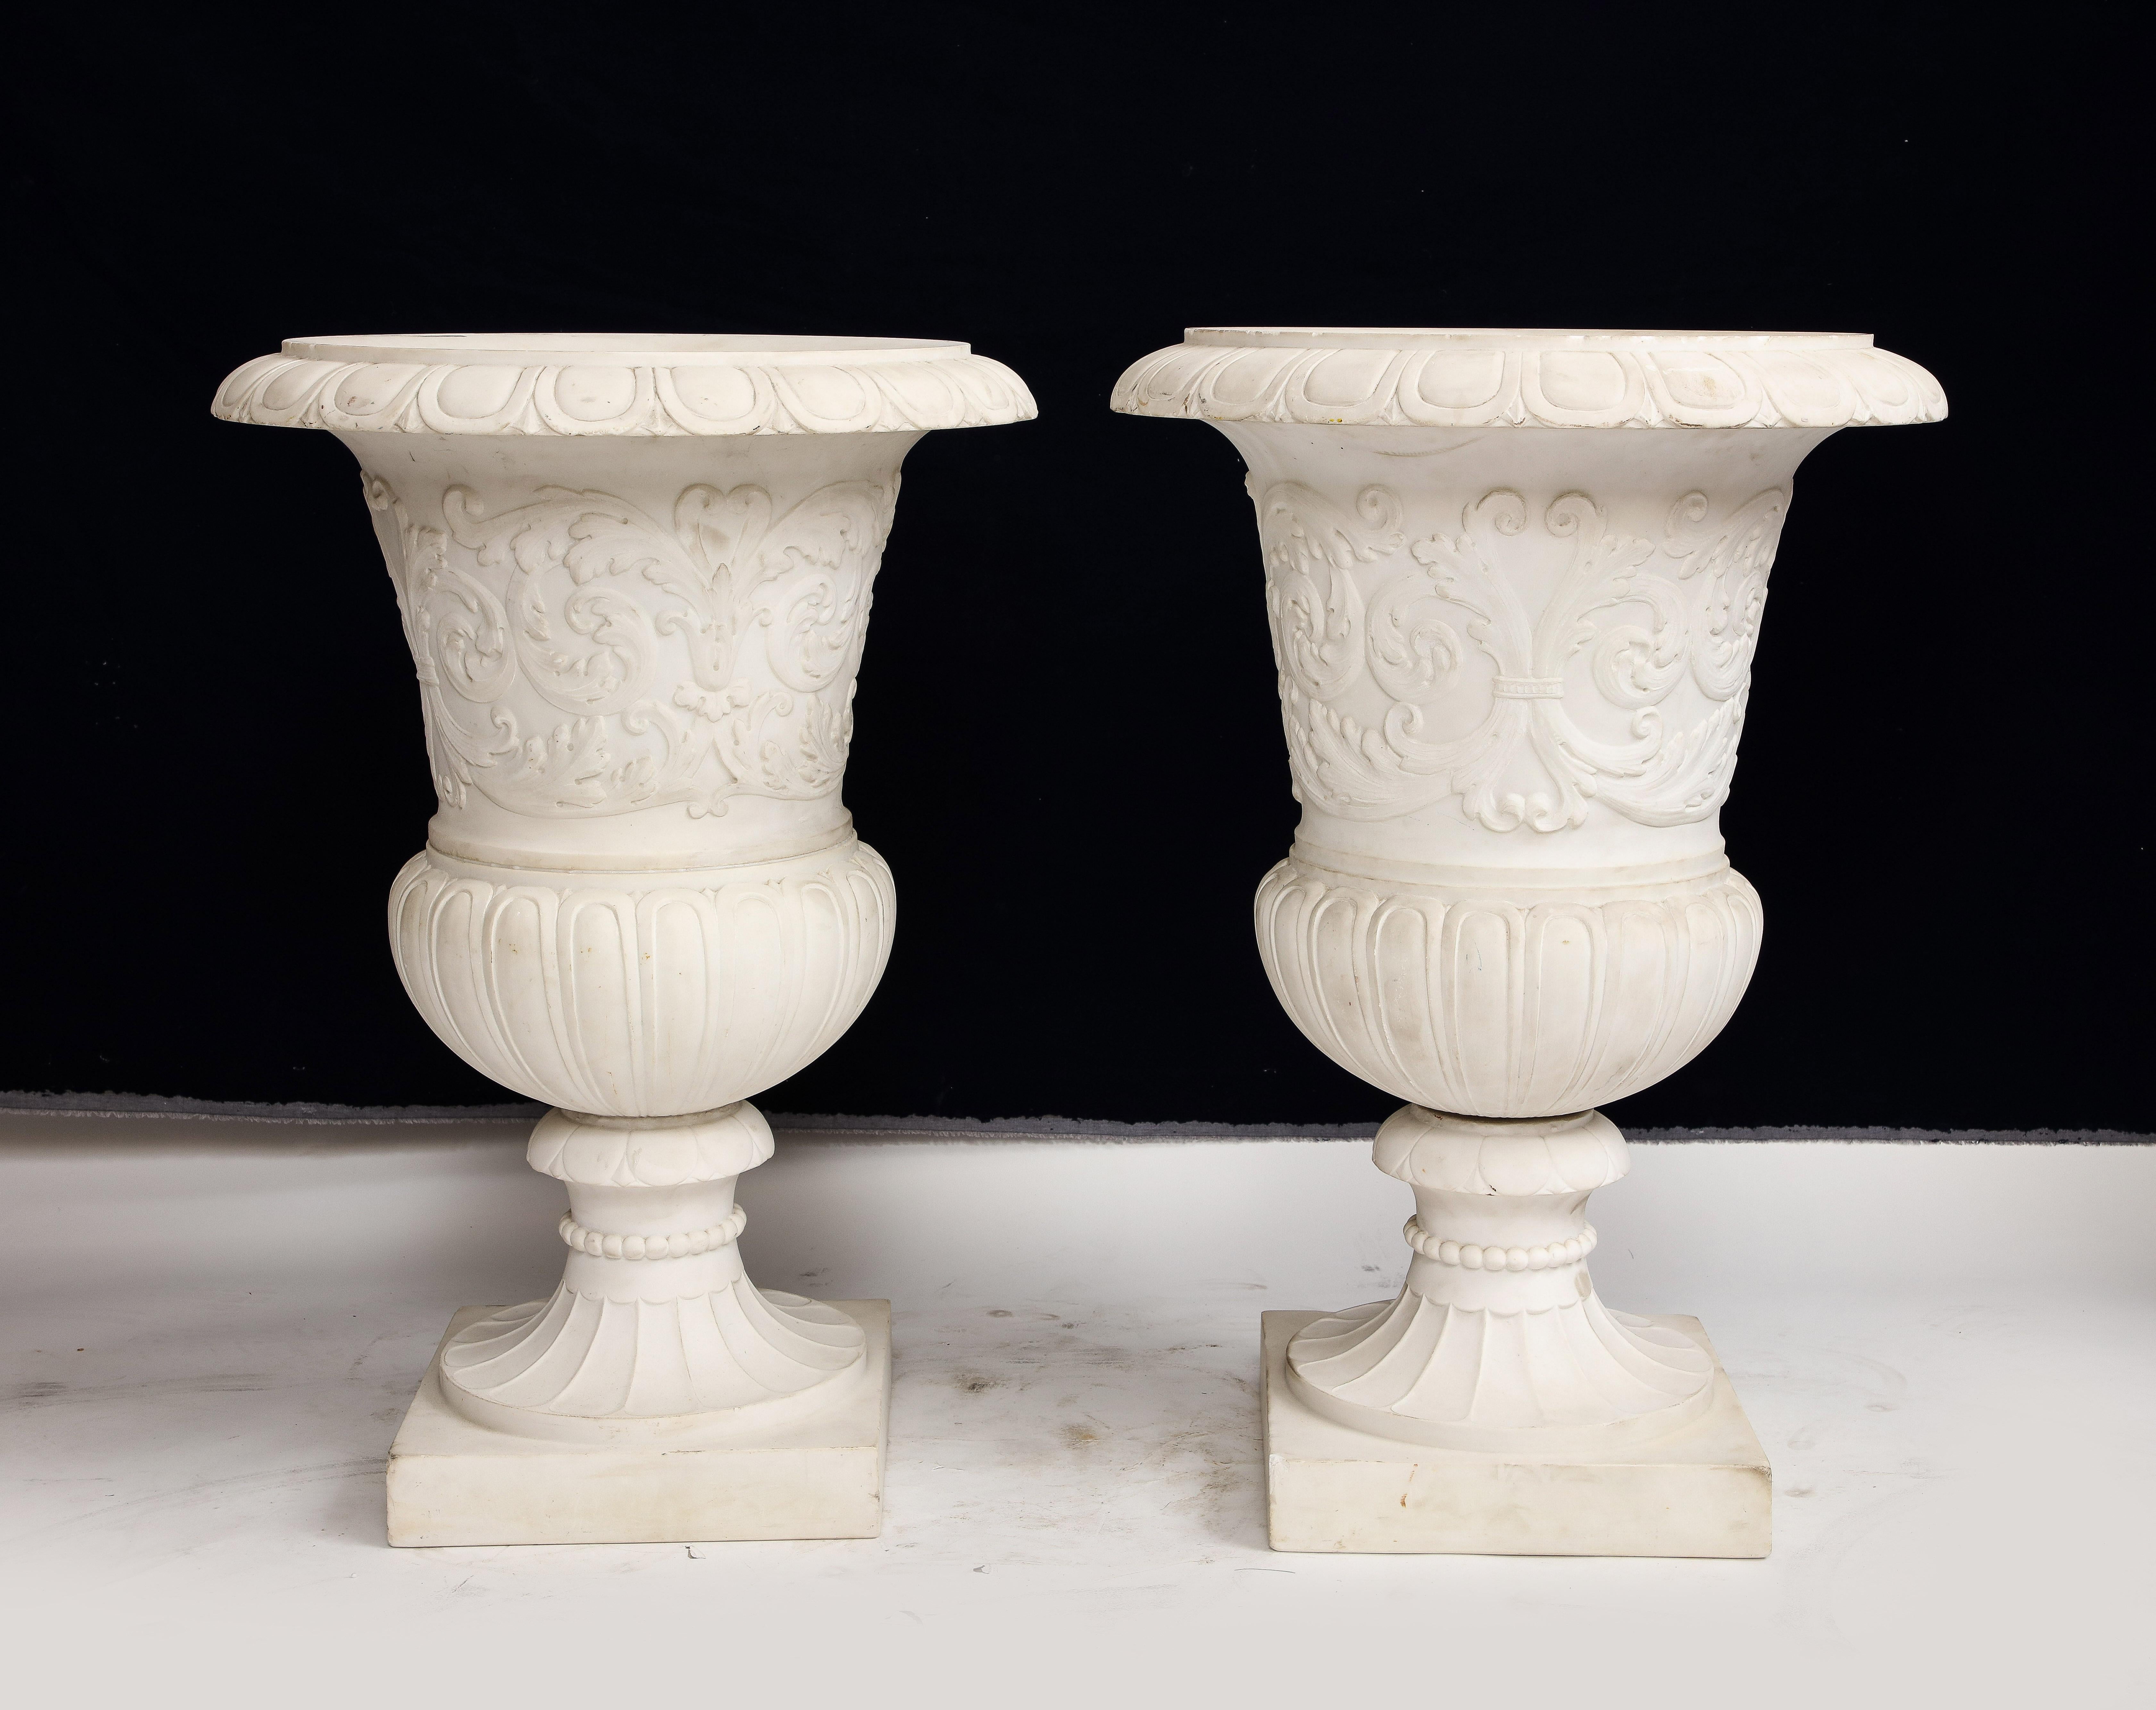 Pair of Italian Carrara Marble Medici Vases w/ Neoclassical Motifs in Relief In Good Condition For Sale In New York, NY